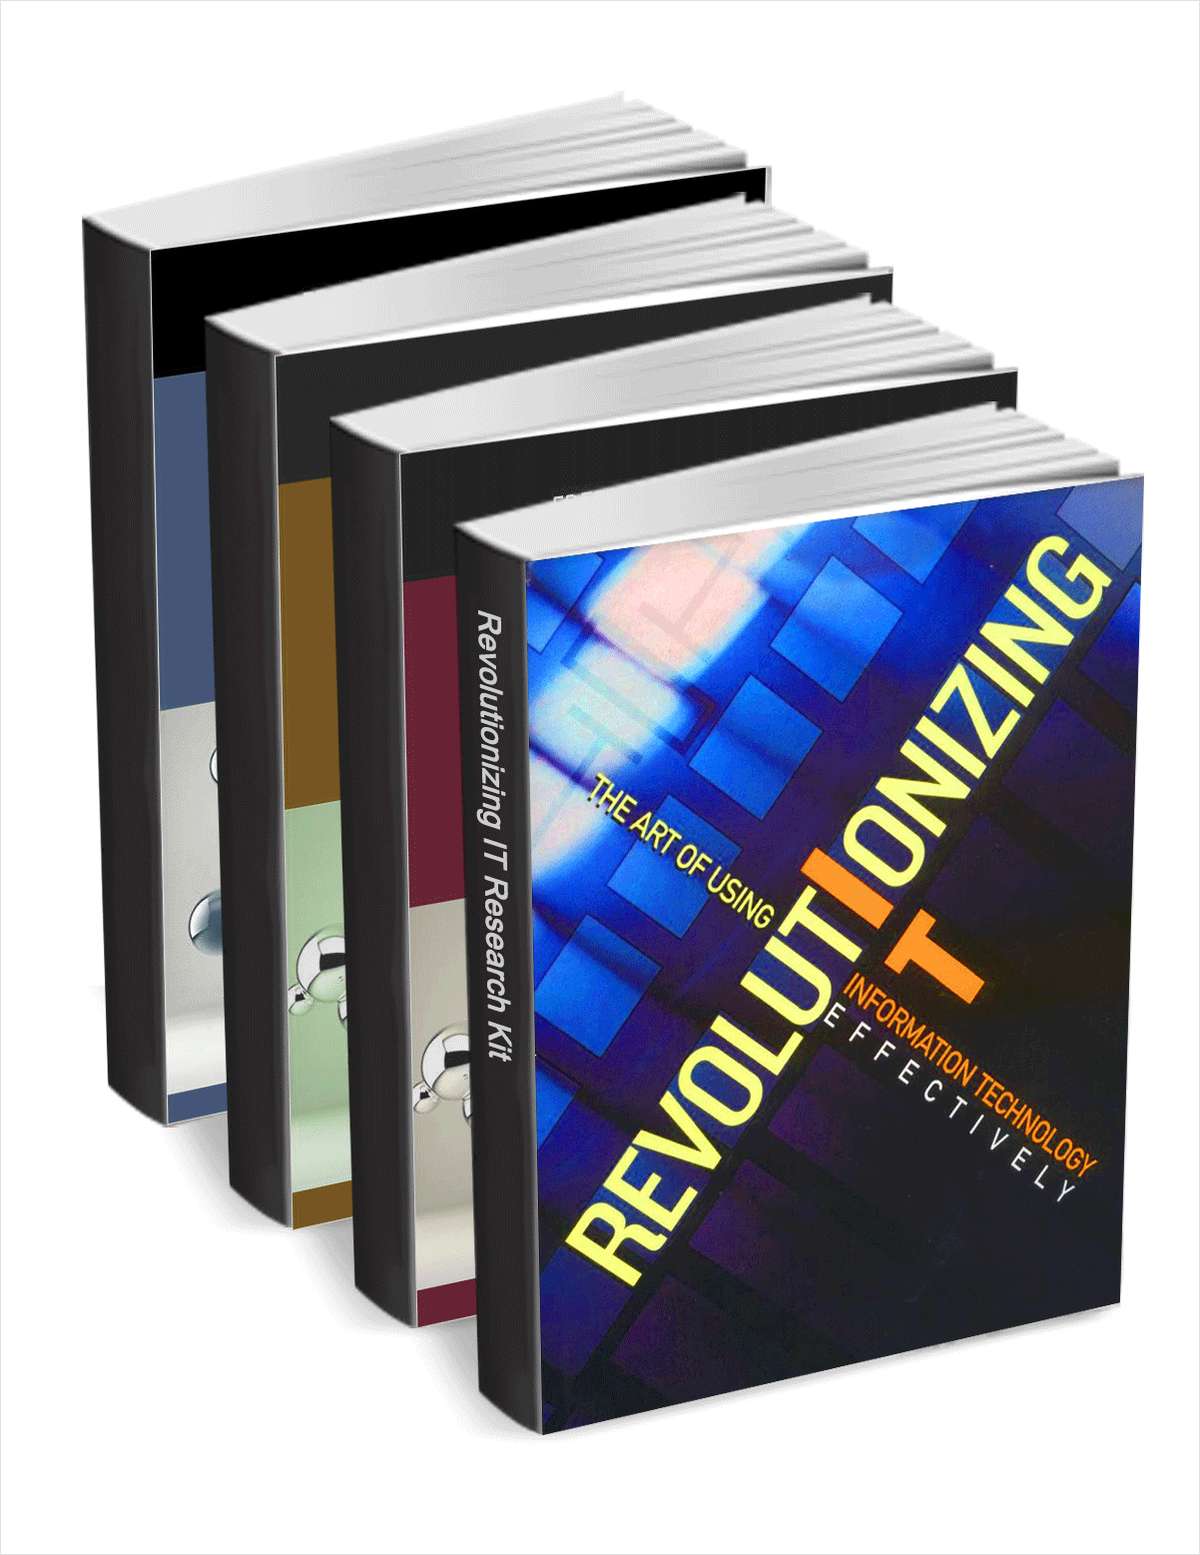 Revolutionizing IT Research Kit - Includes a Free $8.50 Book Summary